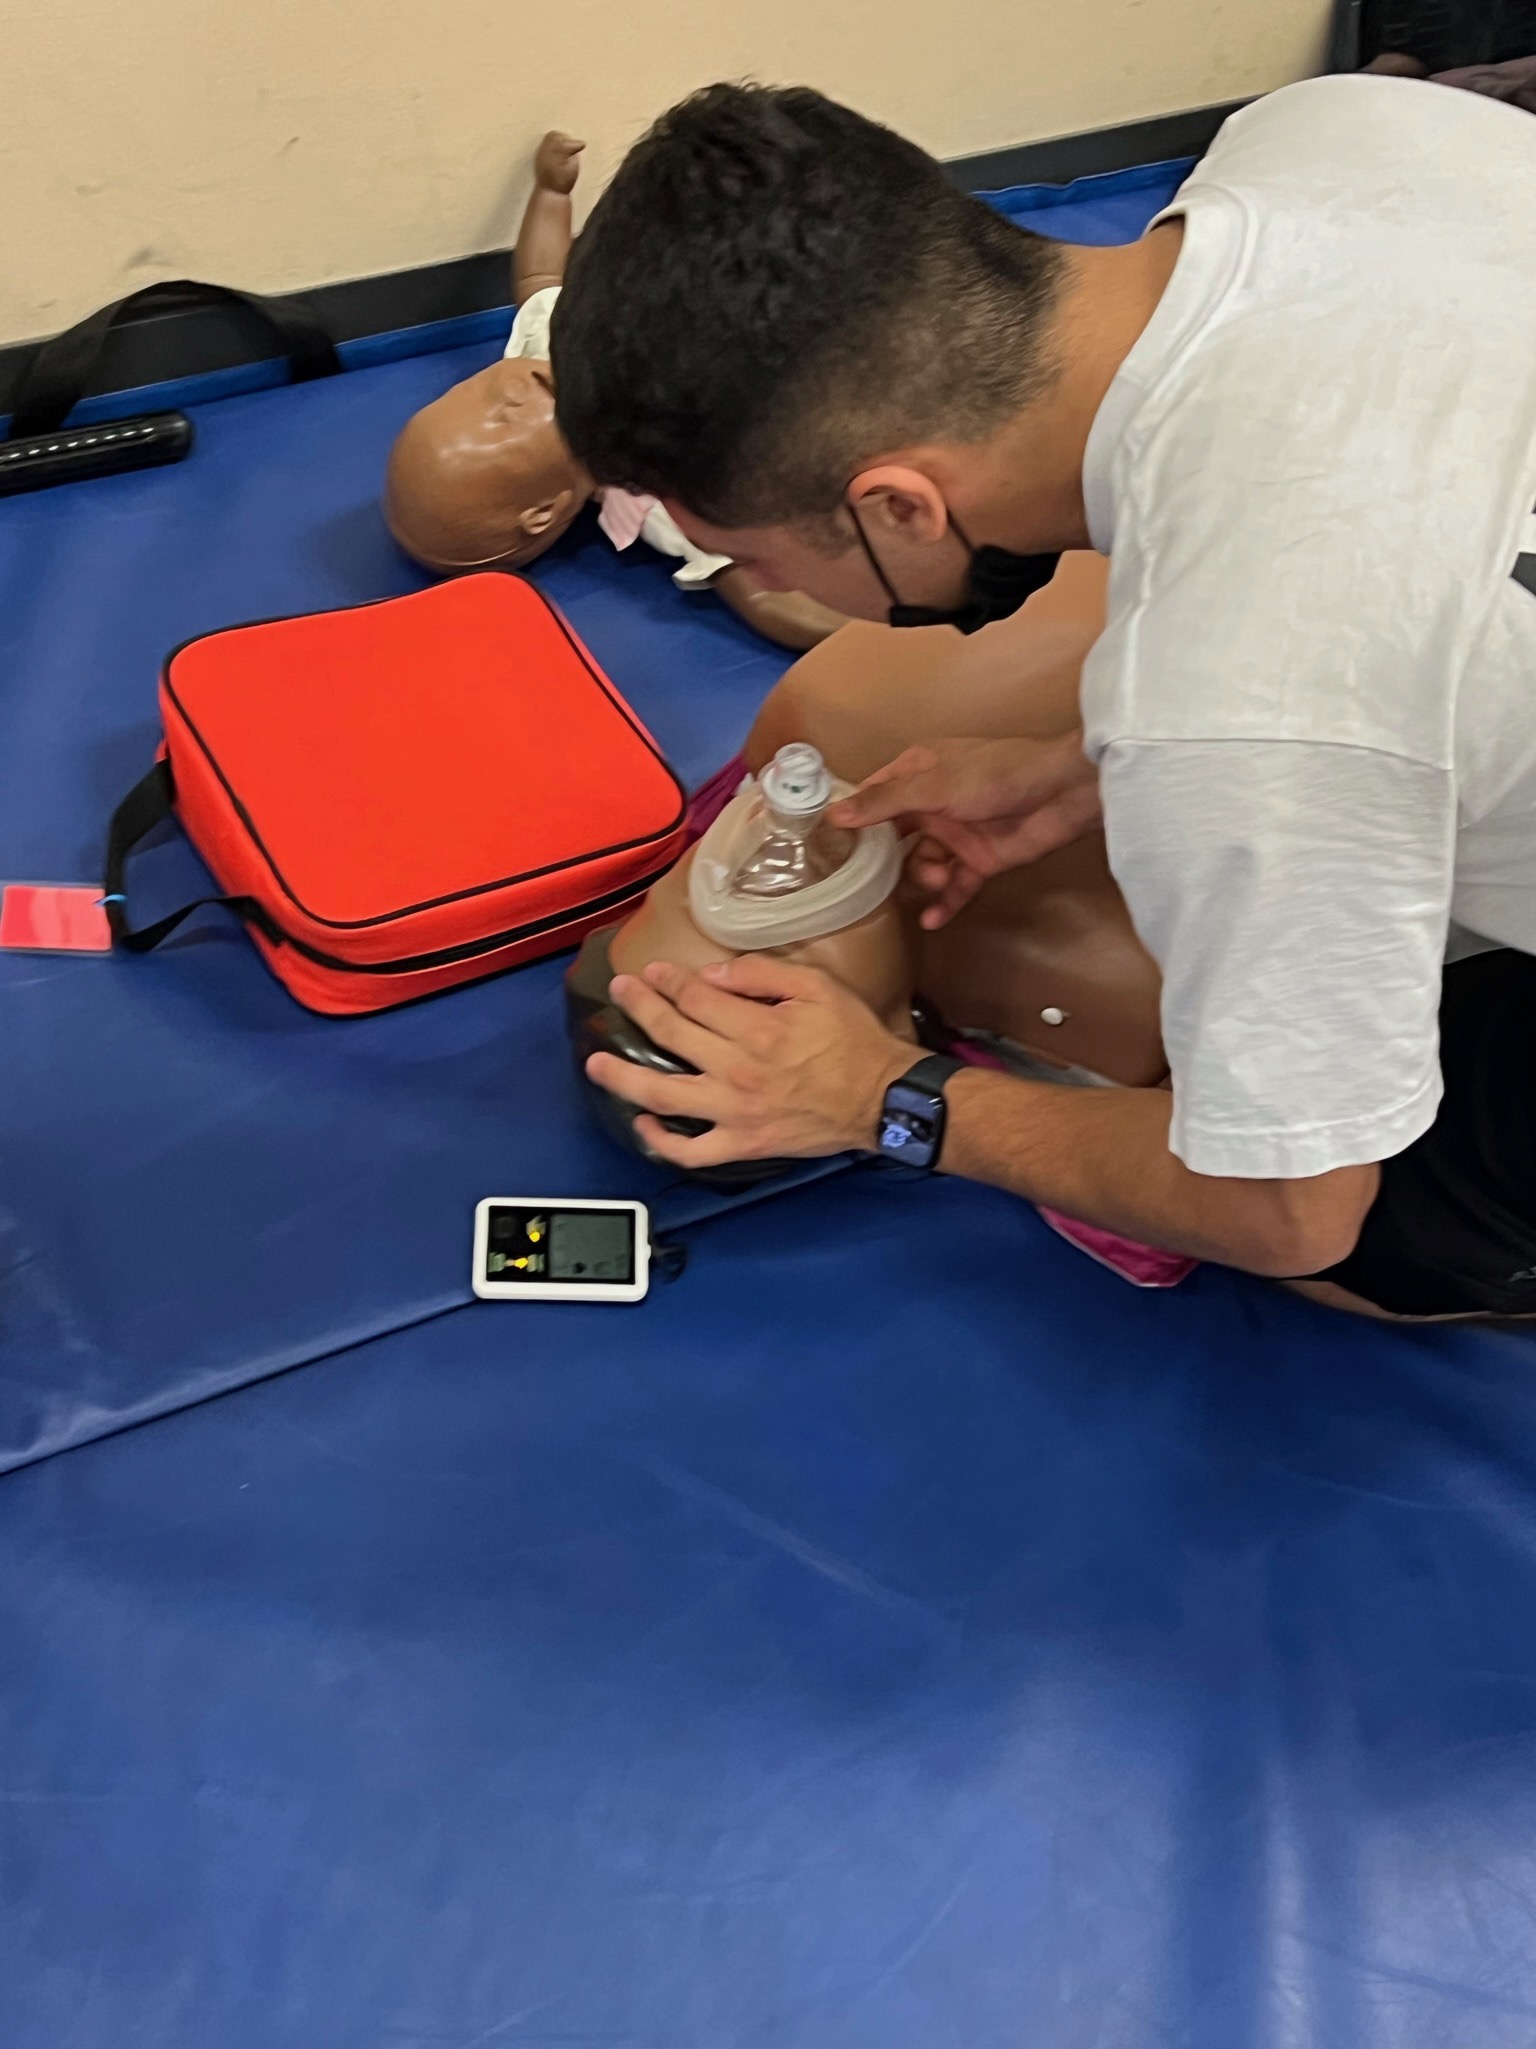 Trainee performing CPR on a manikin during certification